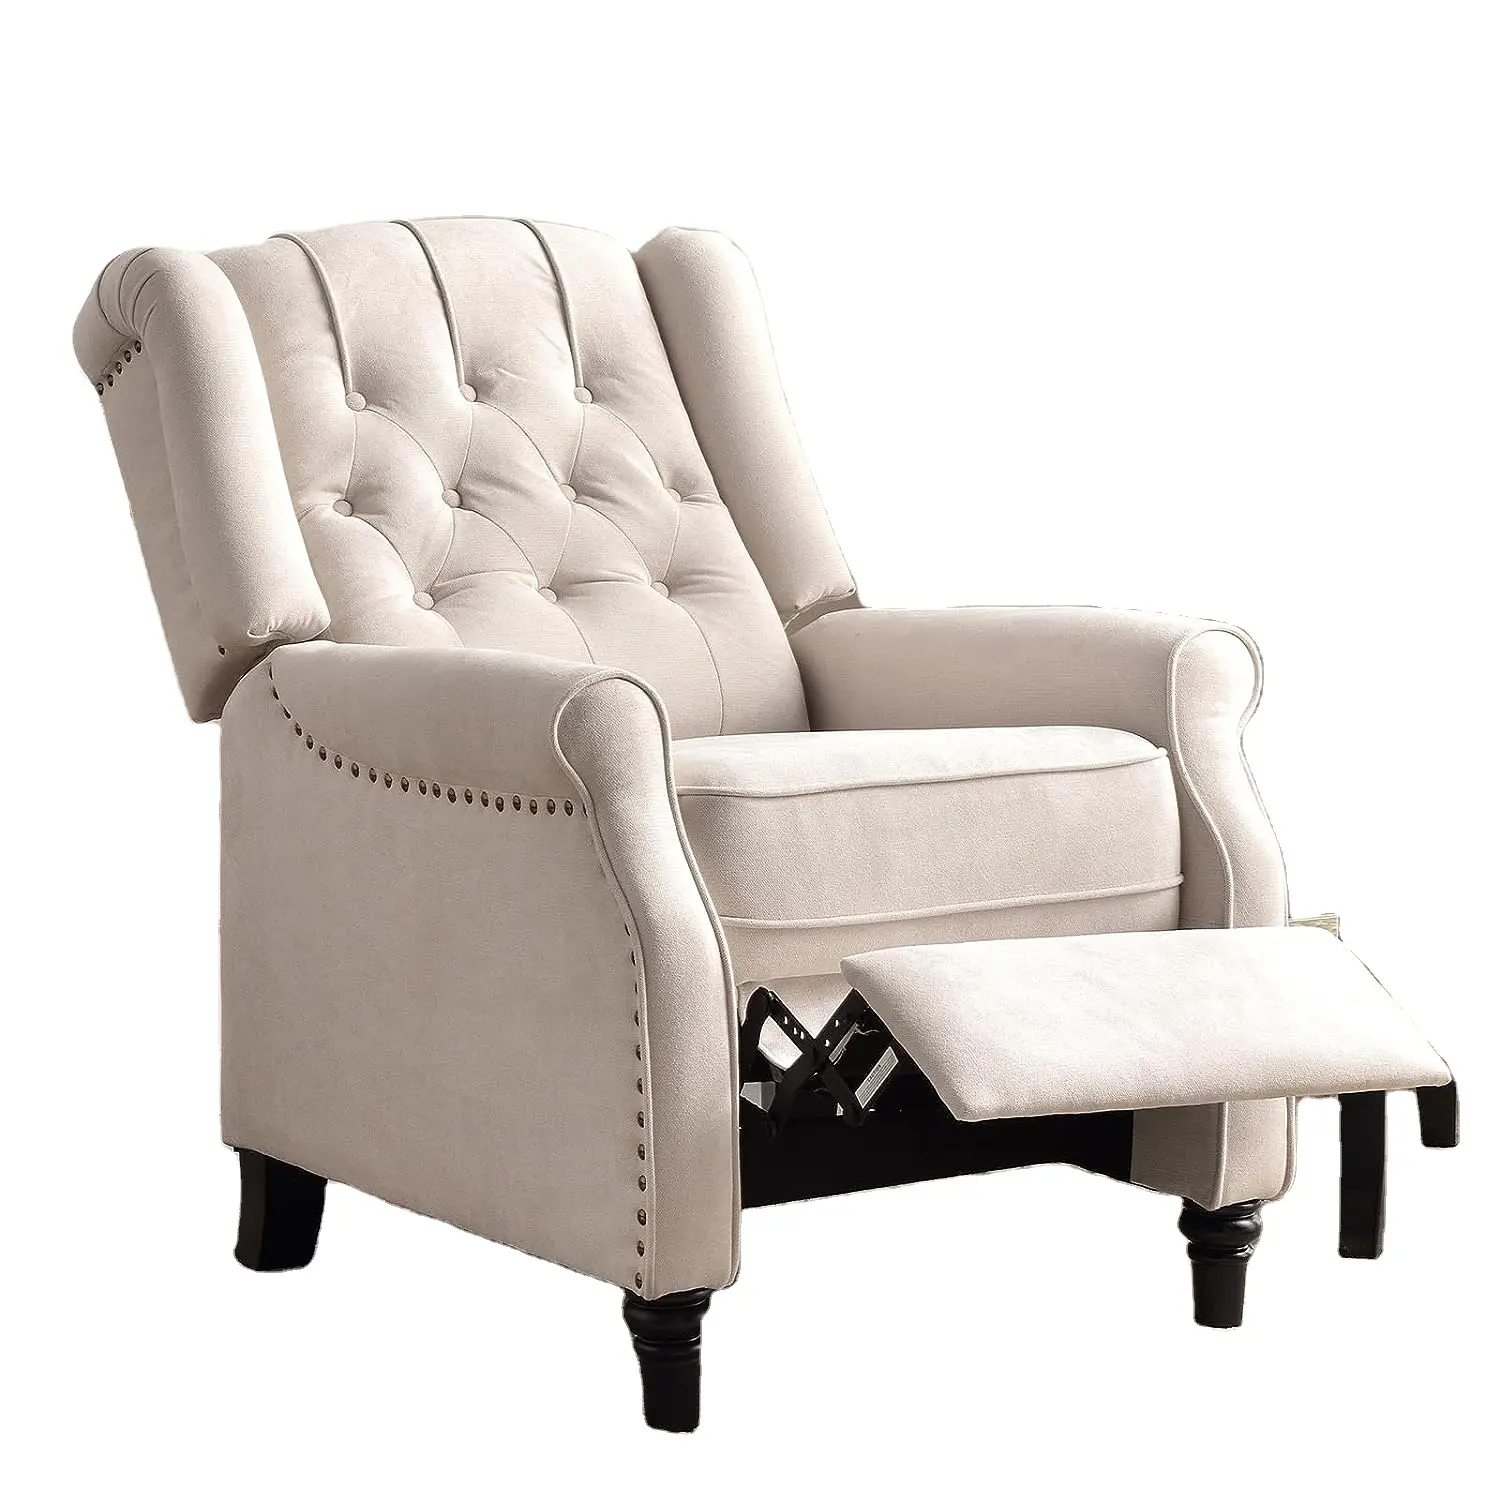 Fabric Armchair Push Back Recliner with Rivet Decoration, Single Sofa Accent Chair for Living Room with beige color